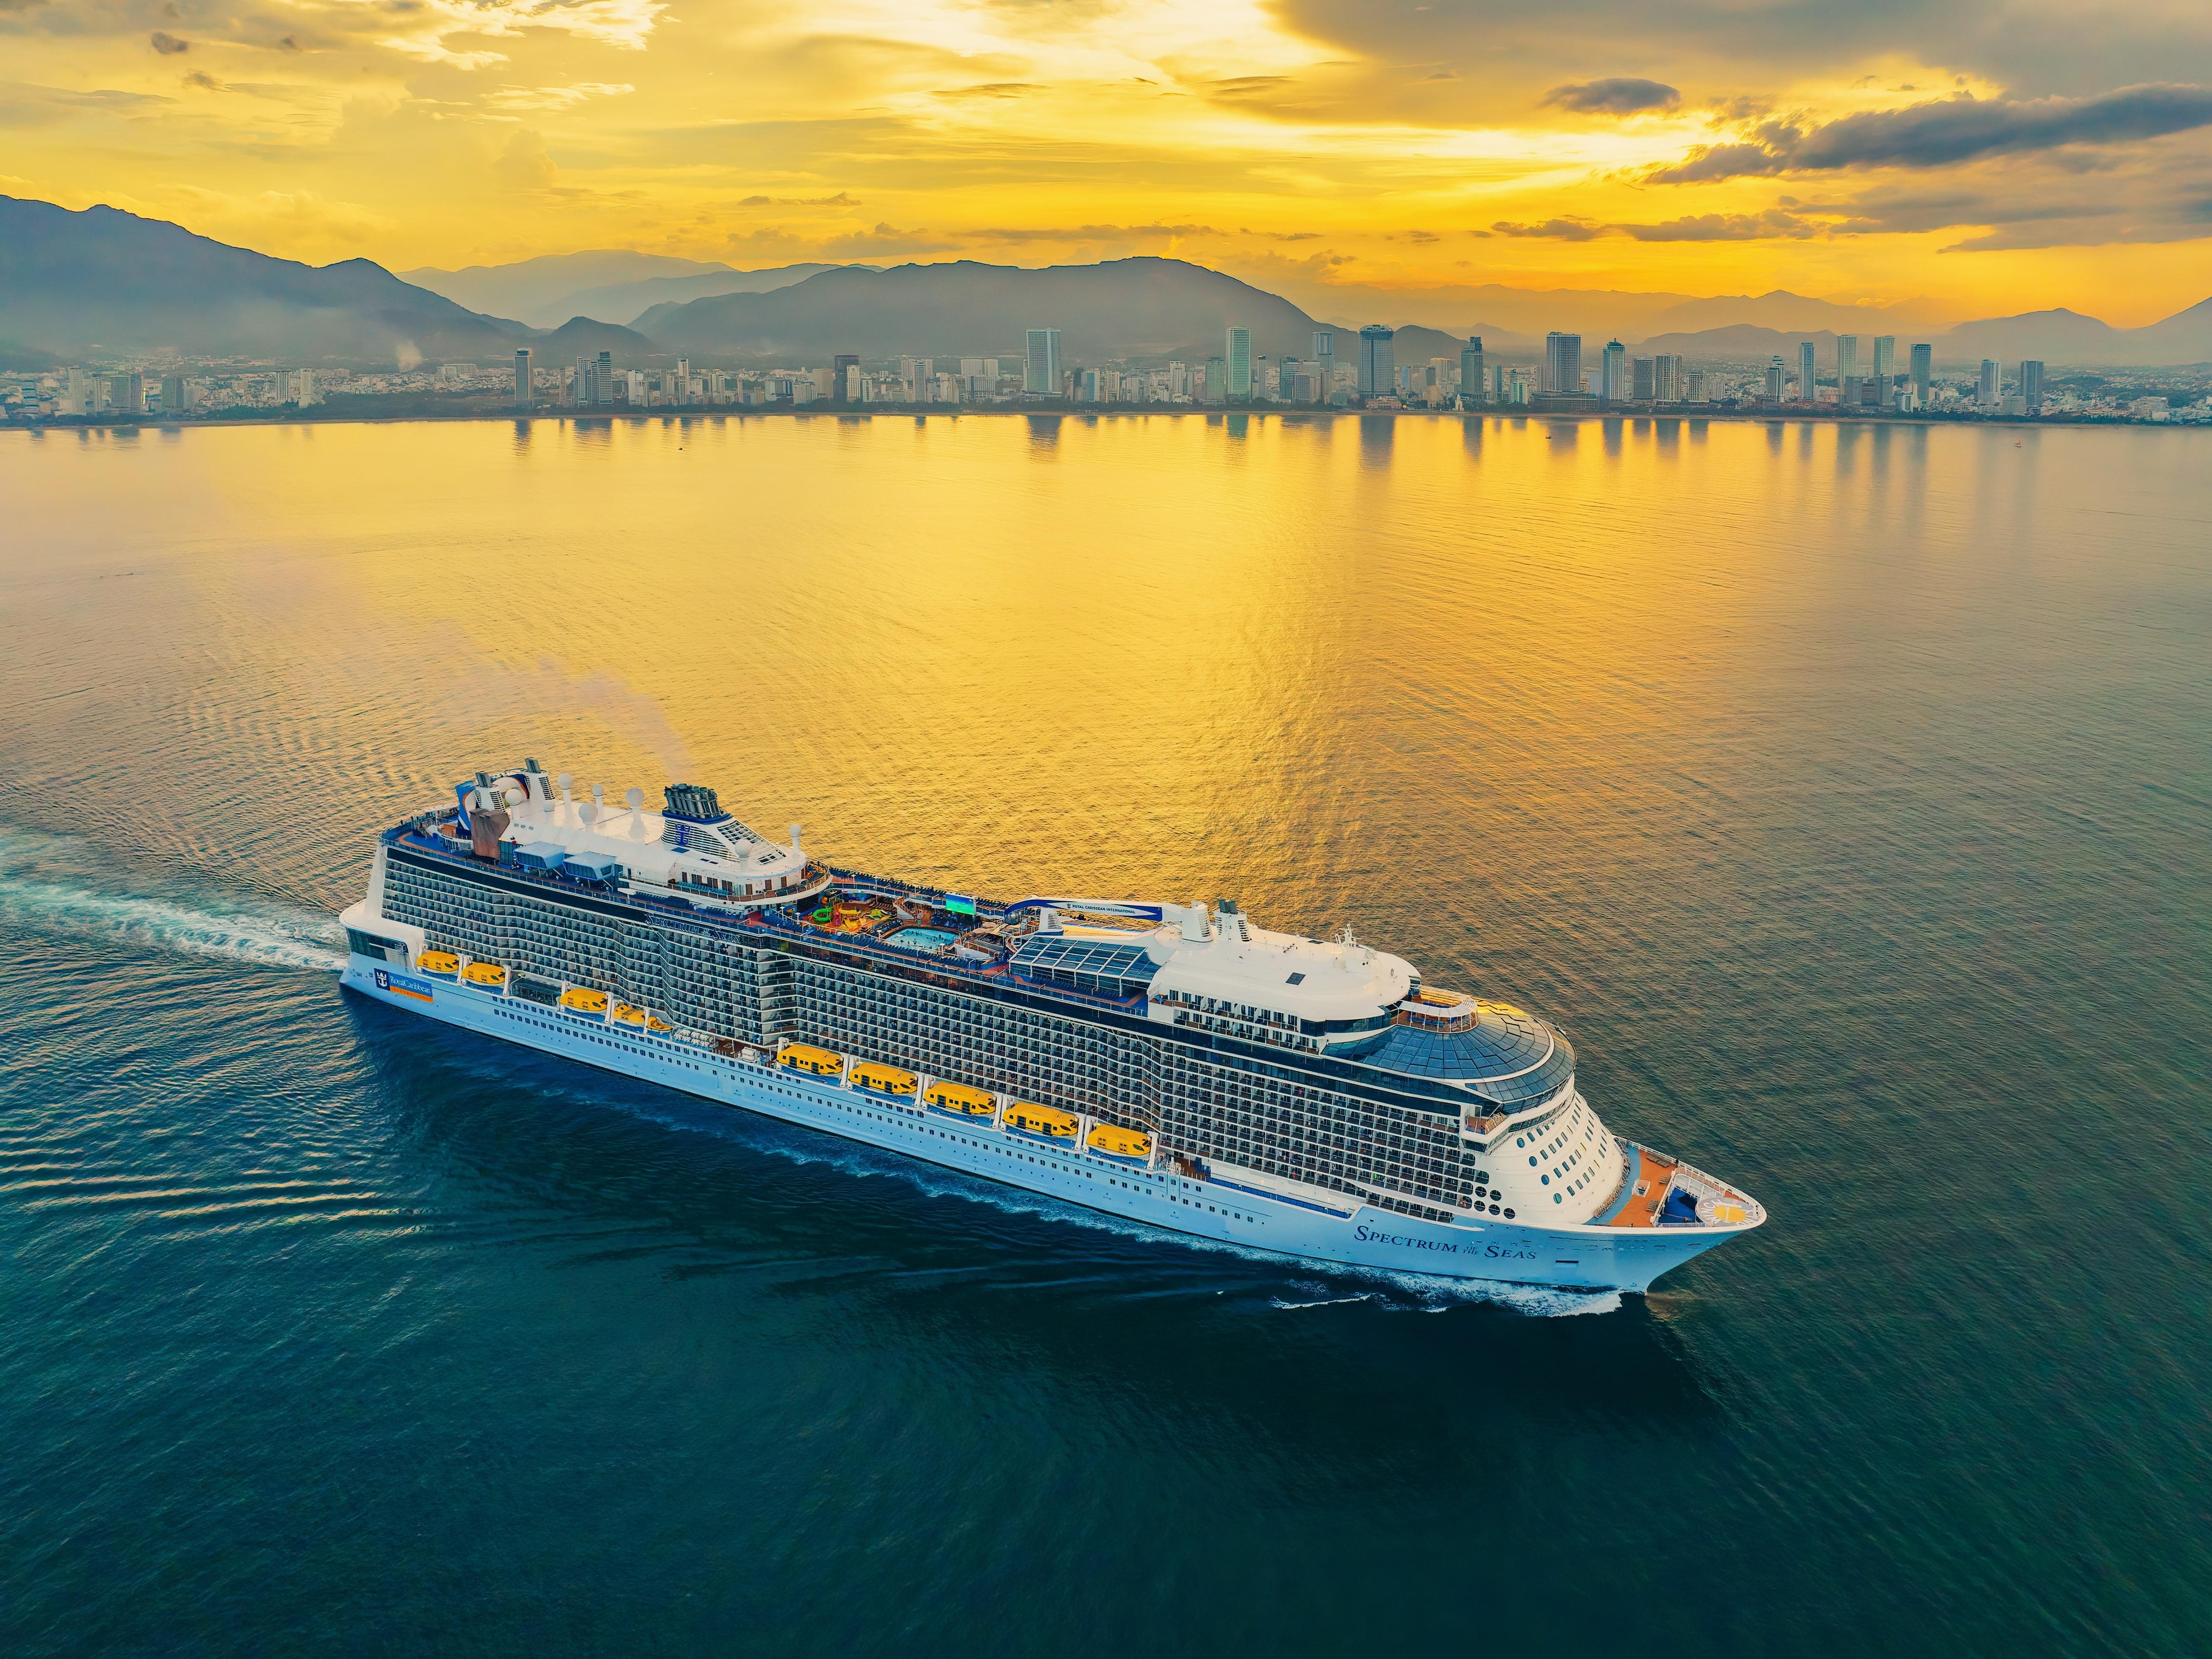 The Royal Caribbean cruise in the sea